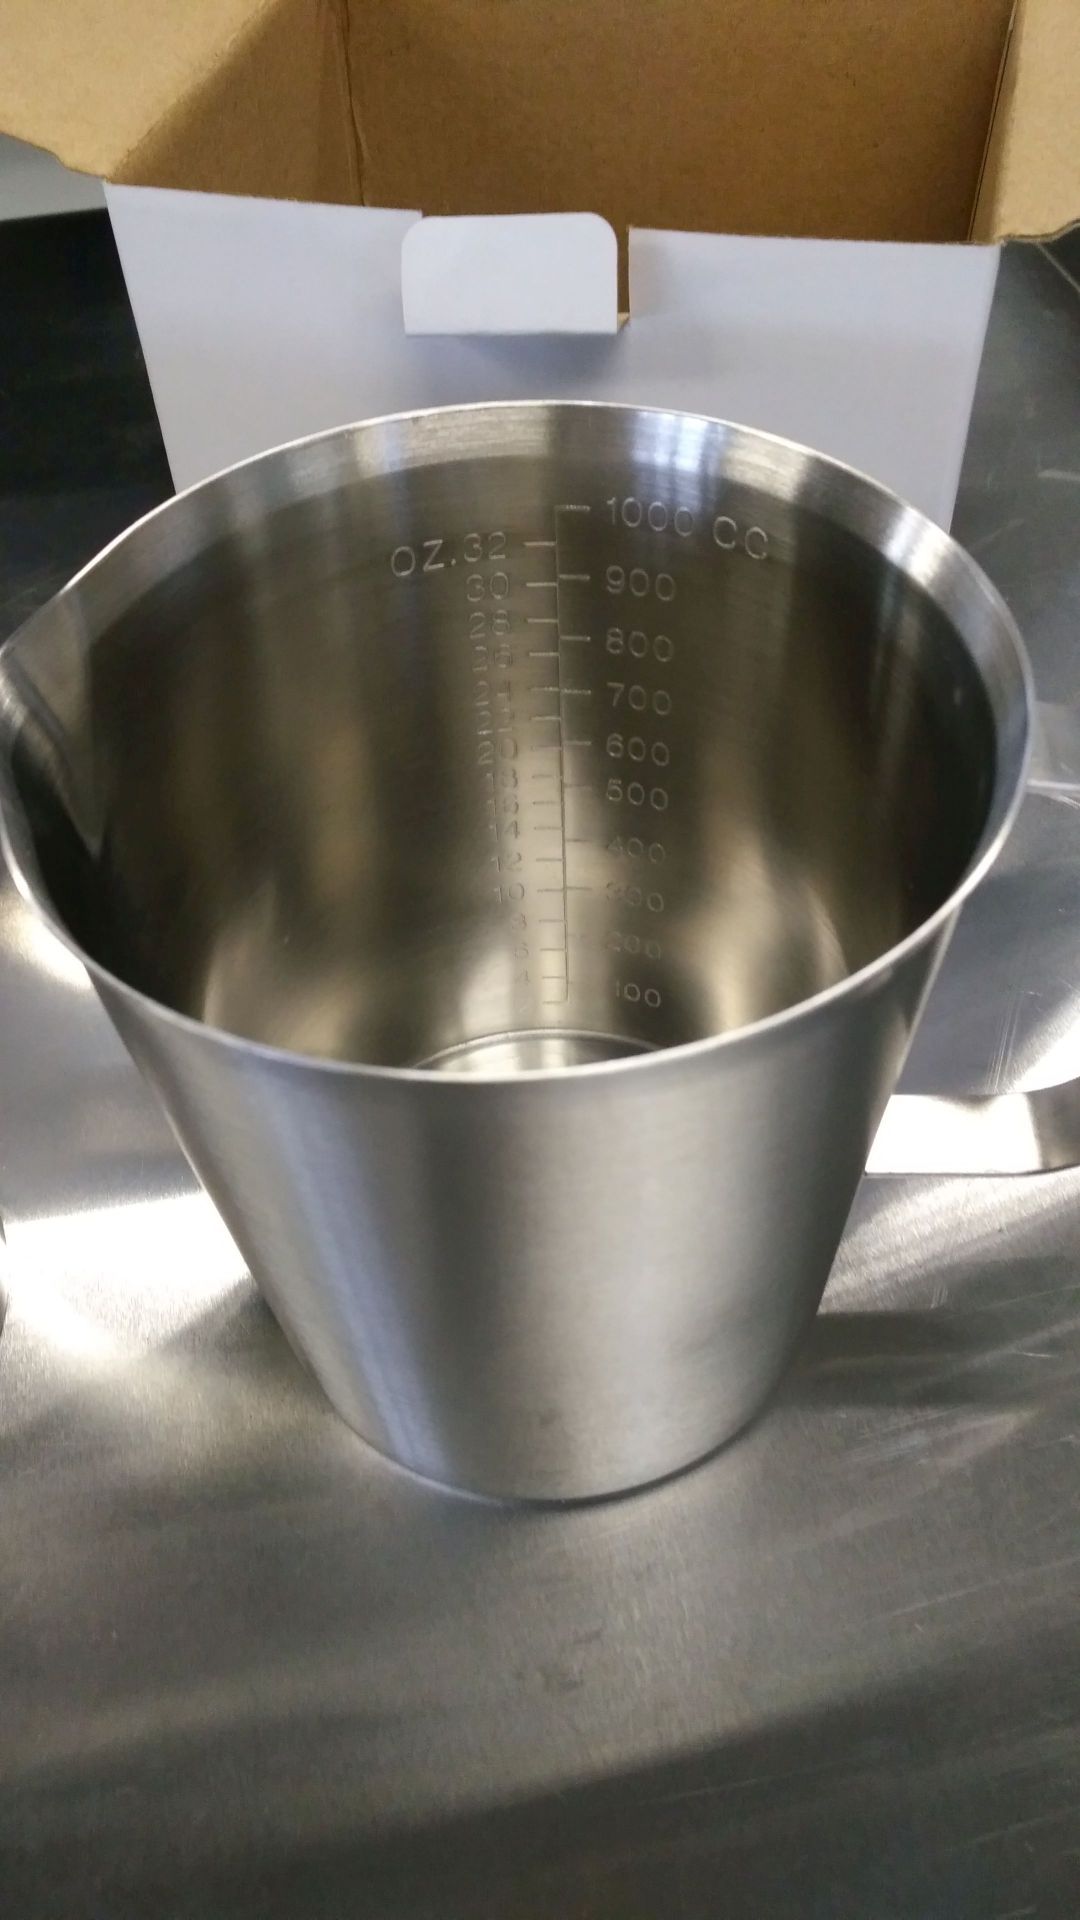 1000ml Heavy Duty Stainless Measures - Lot of 2 - Image 2 of 2